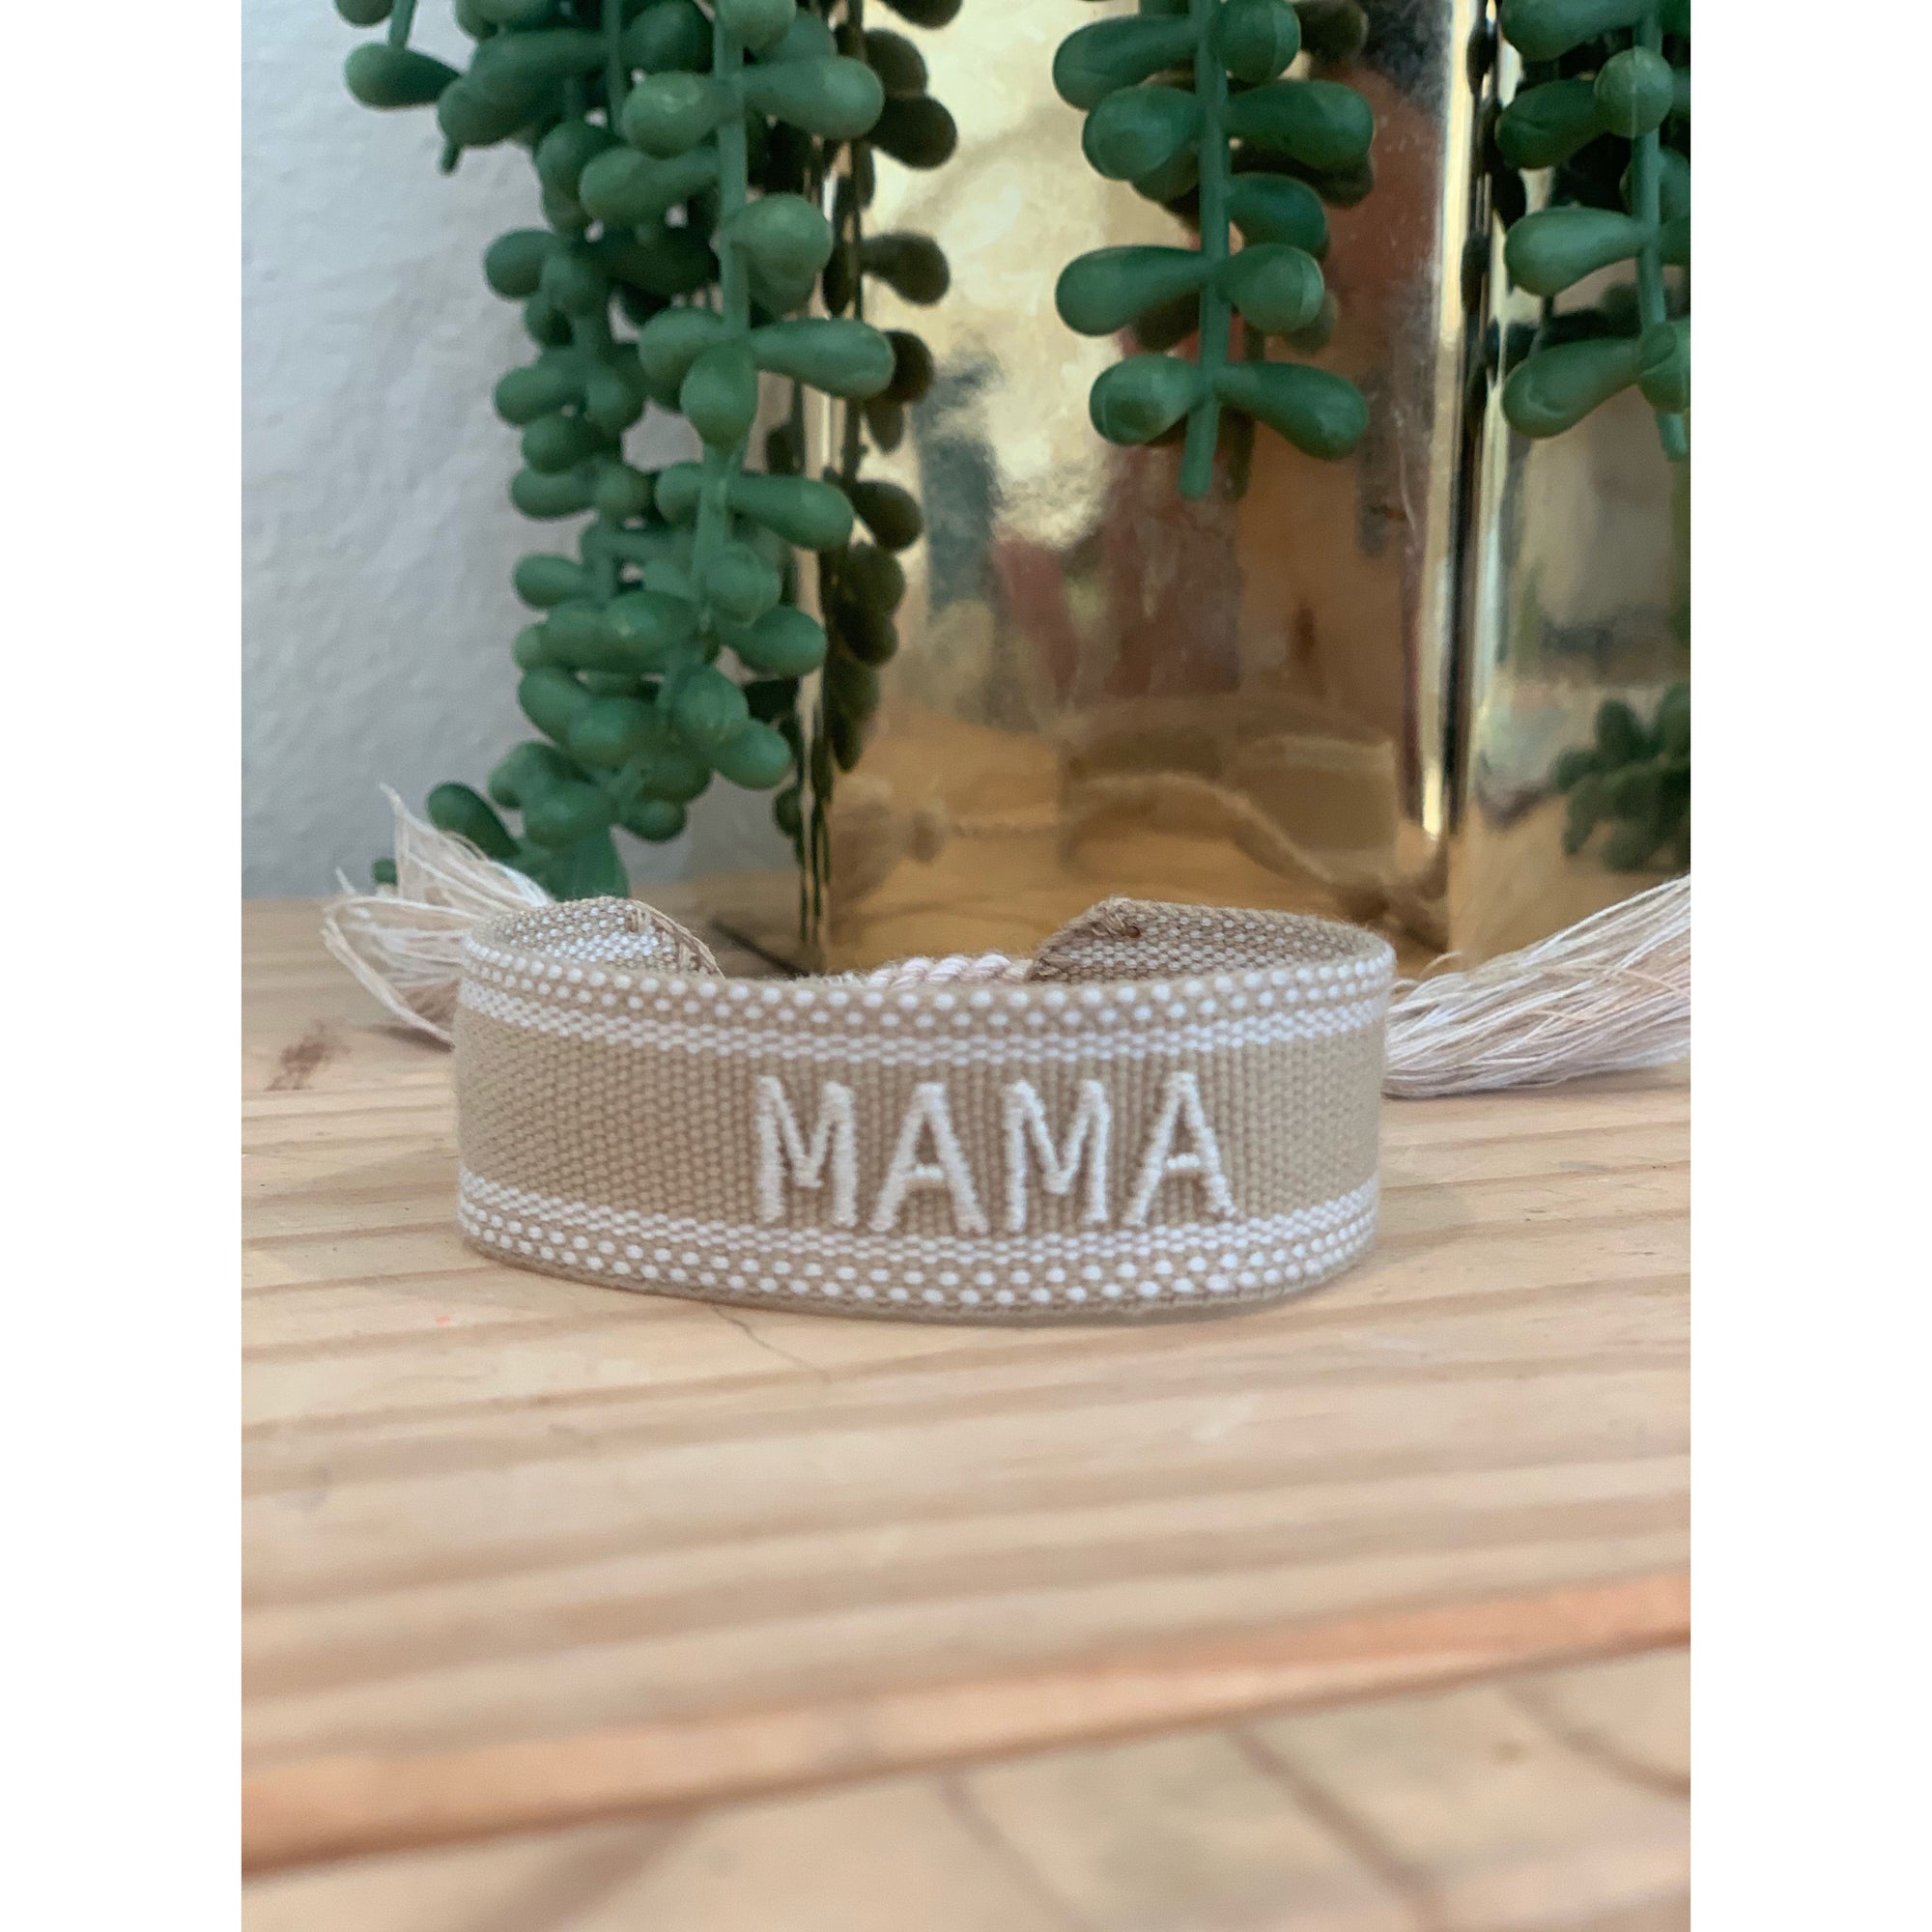 MAMA embroidered friendship bracelet in nude